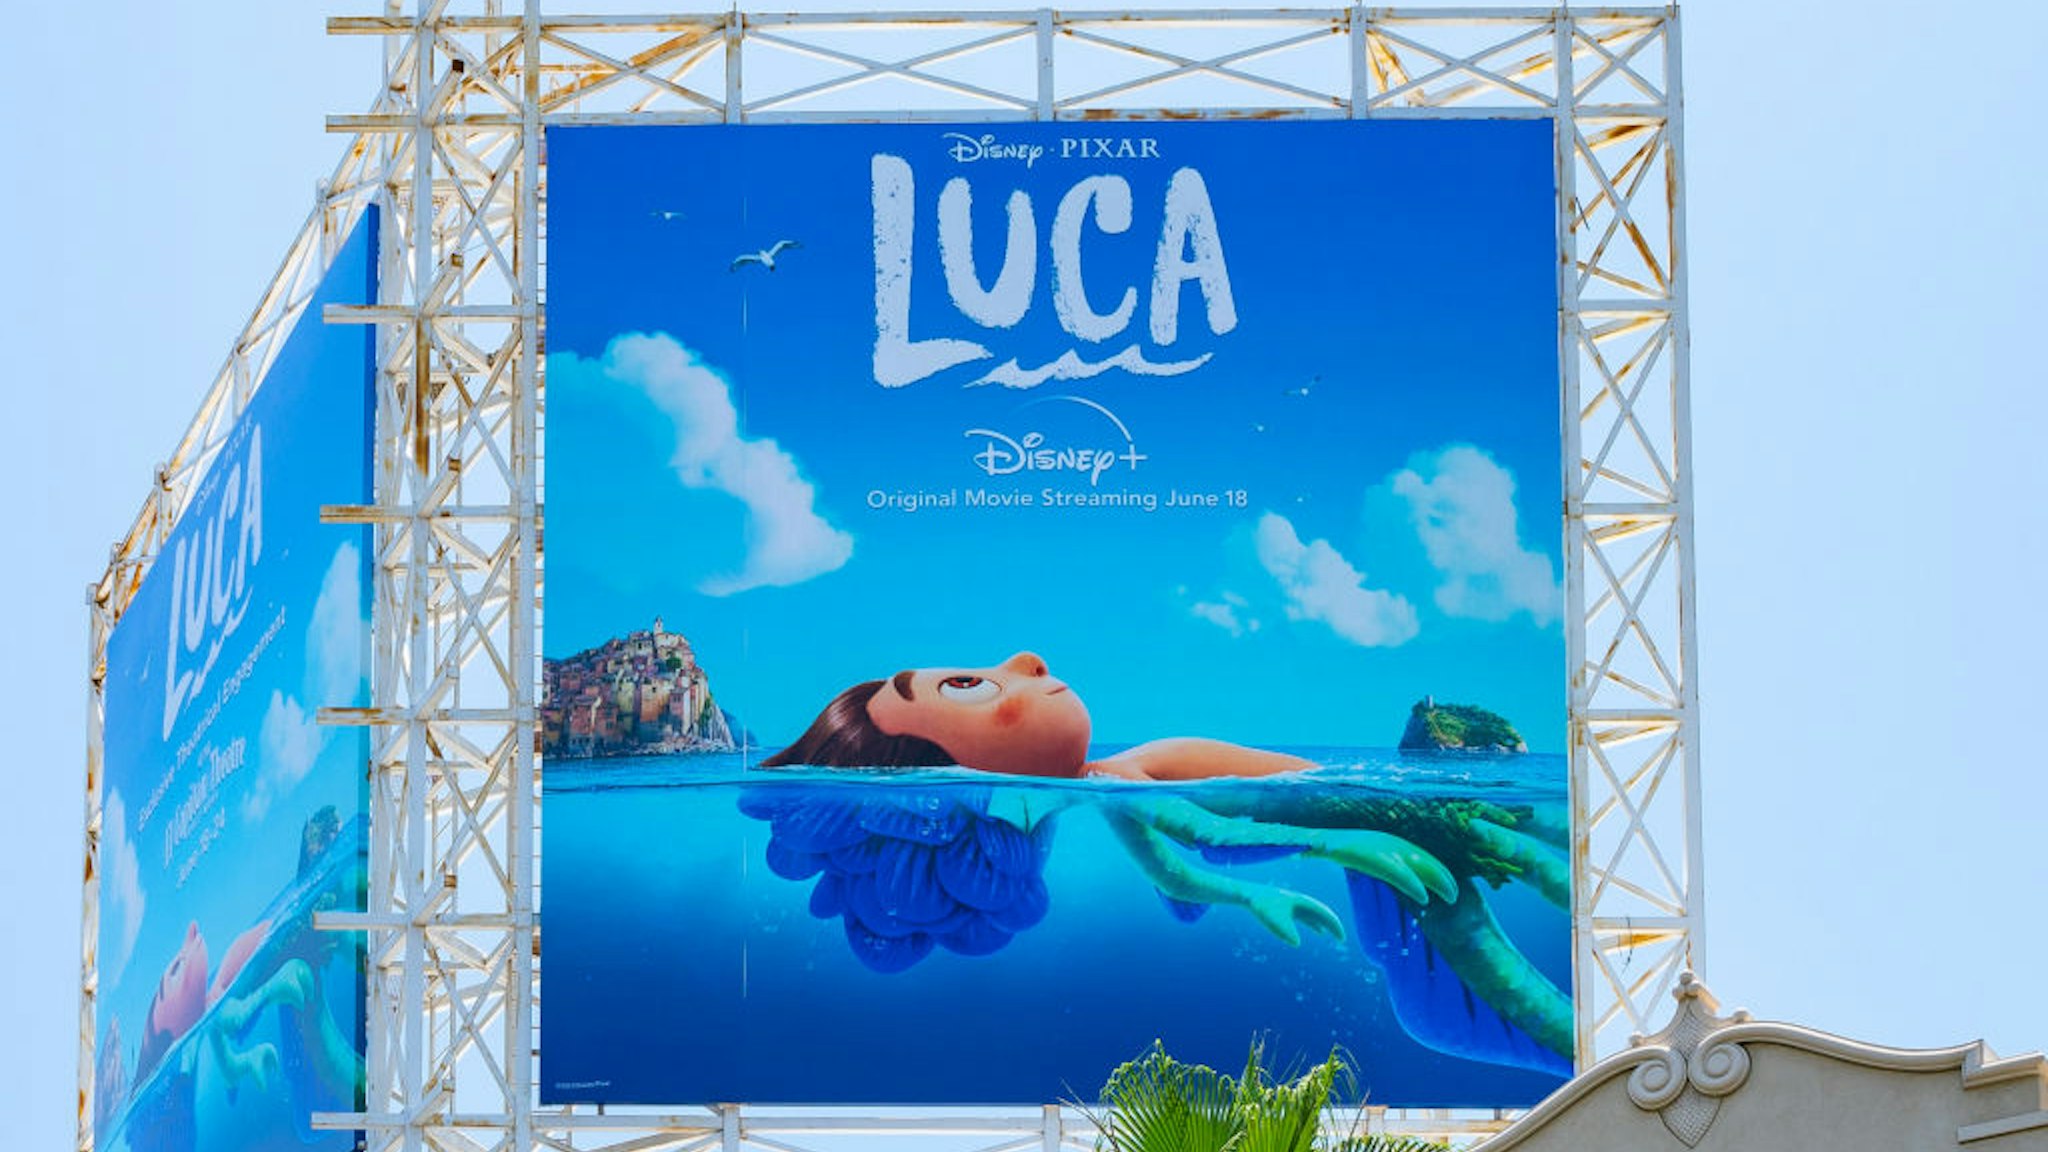 HOLLYWOOD, CA - JUNE 03: General view of a billboard above the El Capitan Entertainment Centre promoting the new Pixar film 'Luca', streaming on Disney+ on June 18th on June 03, 2021 in Hollywood, California. (Photo by AaronP/Bauer-Griffin/GC Images)